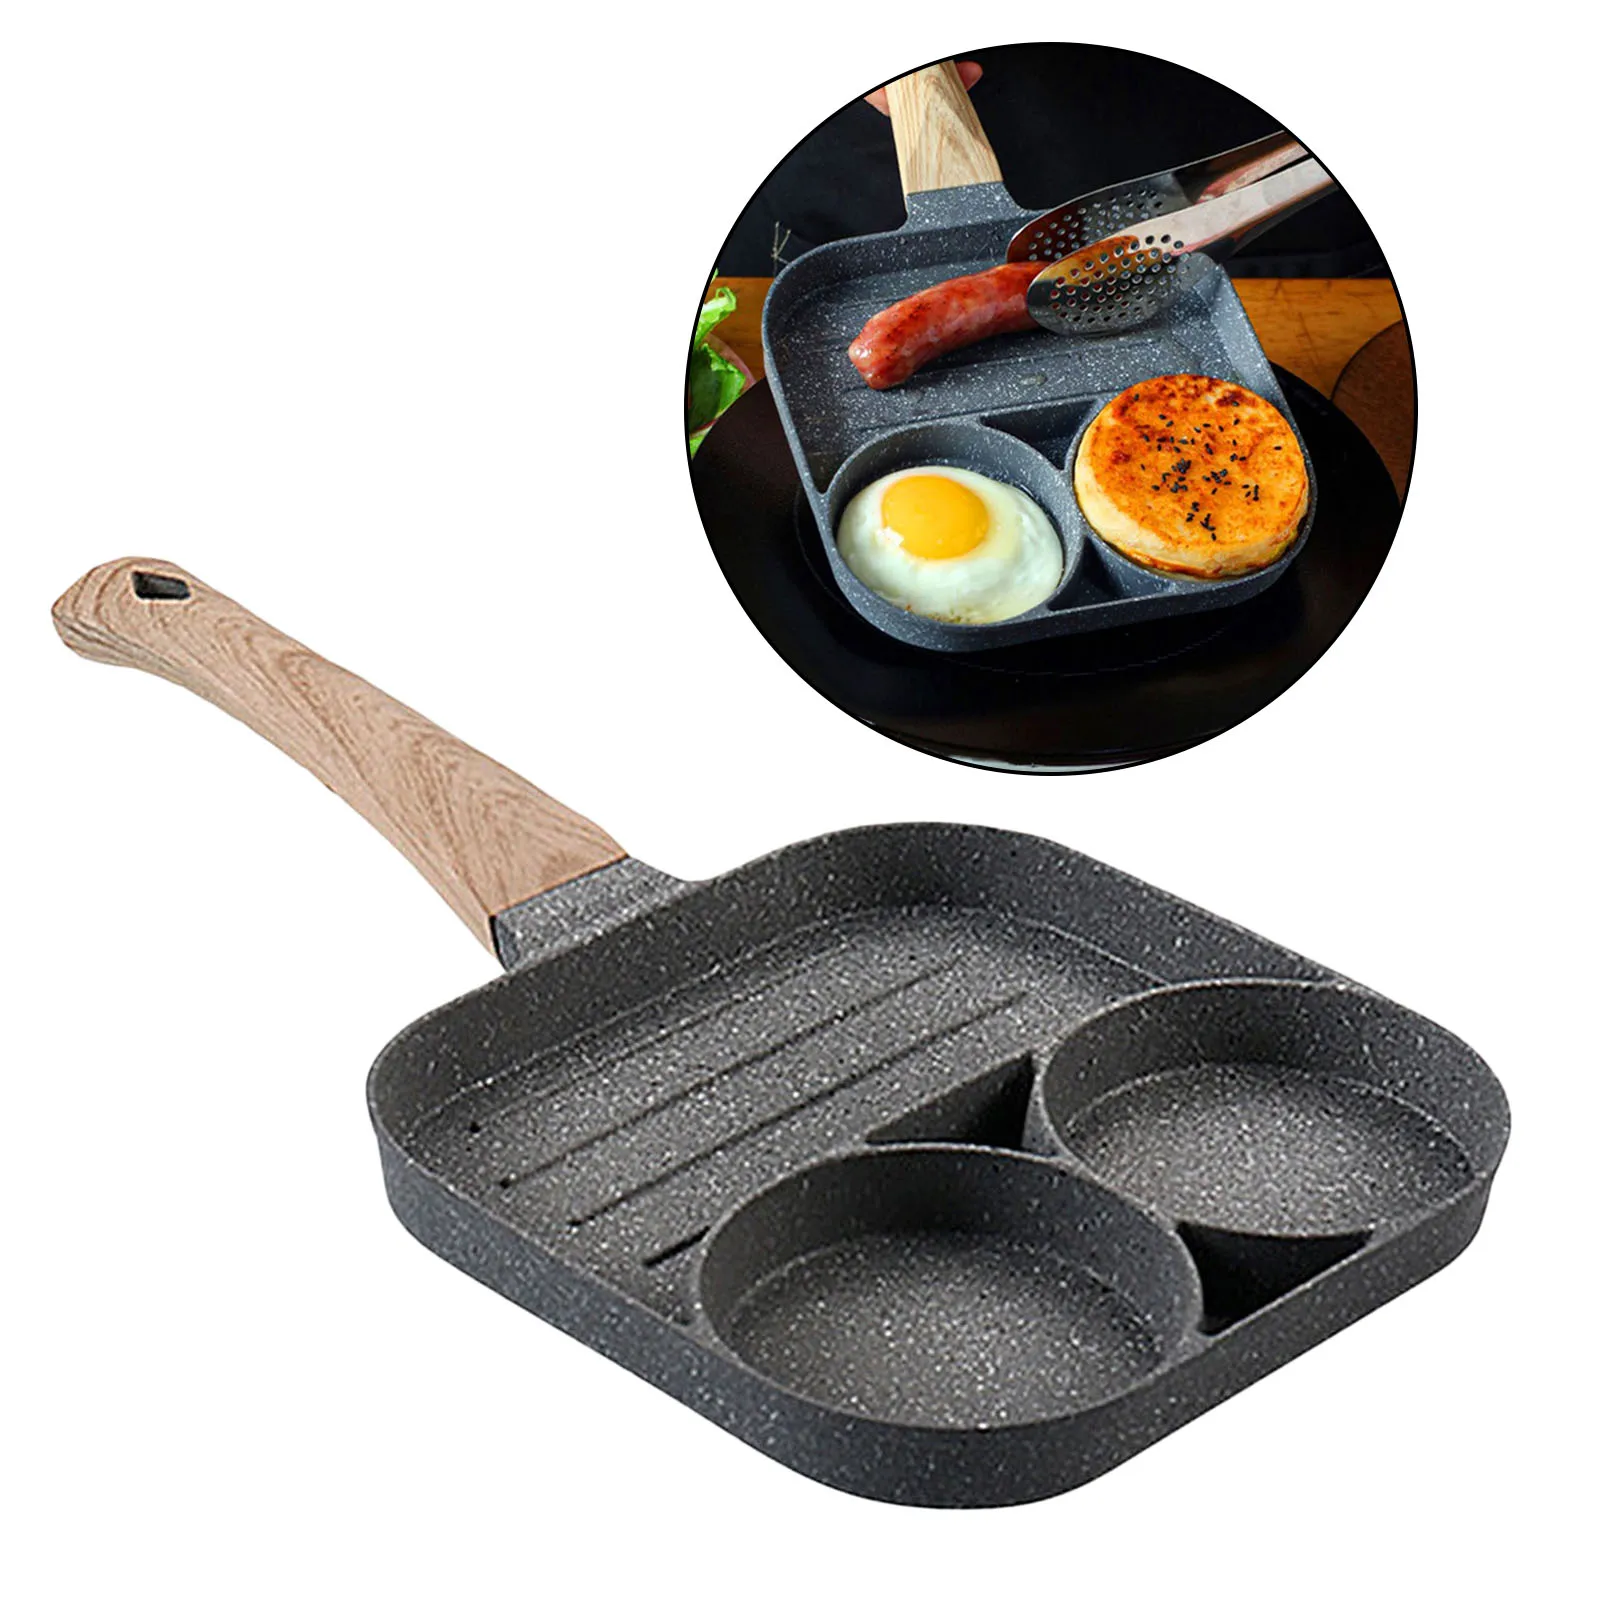 https://ae01.alicdn.com/kf/H85f269a0697a49978107ff59efc2dff4U/Medical-Stone-Egg-Frying-Pan-Non-Stick-3-Cup-Bacon-Sausage-Hamburg-Cooker-Pan-Skillet-for.jpg